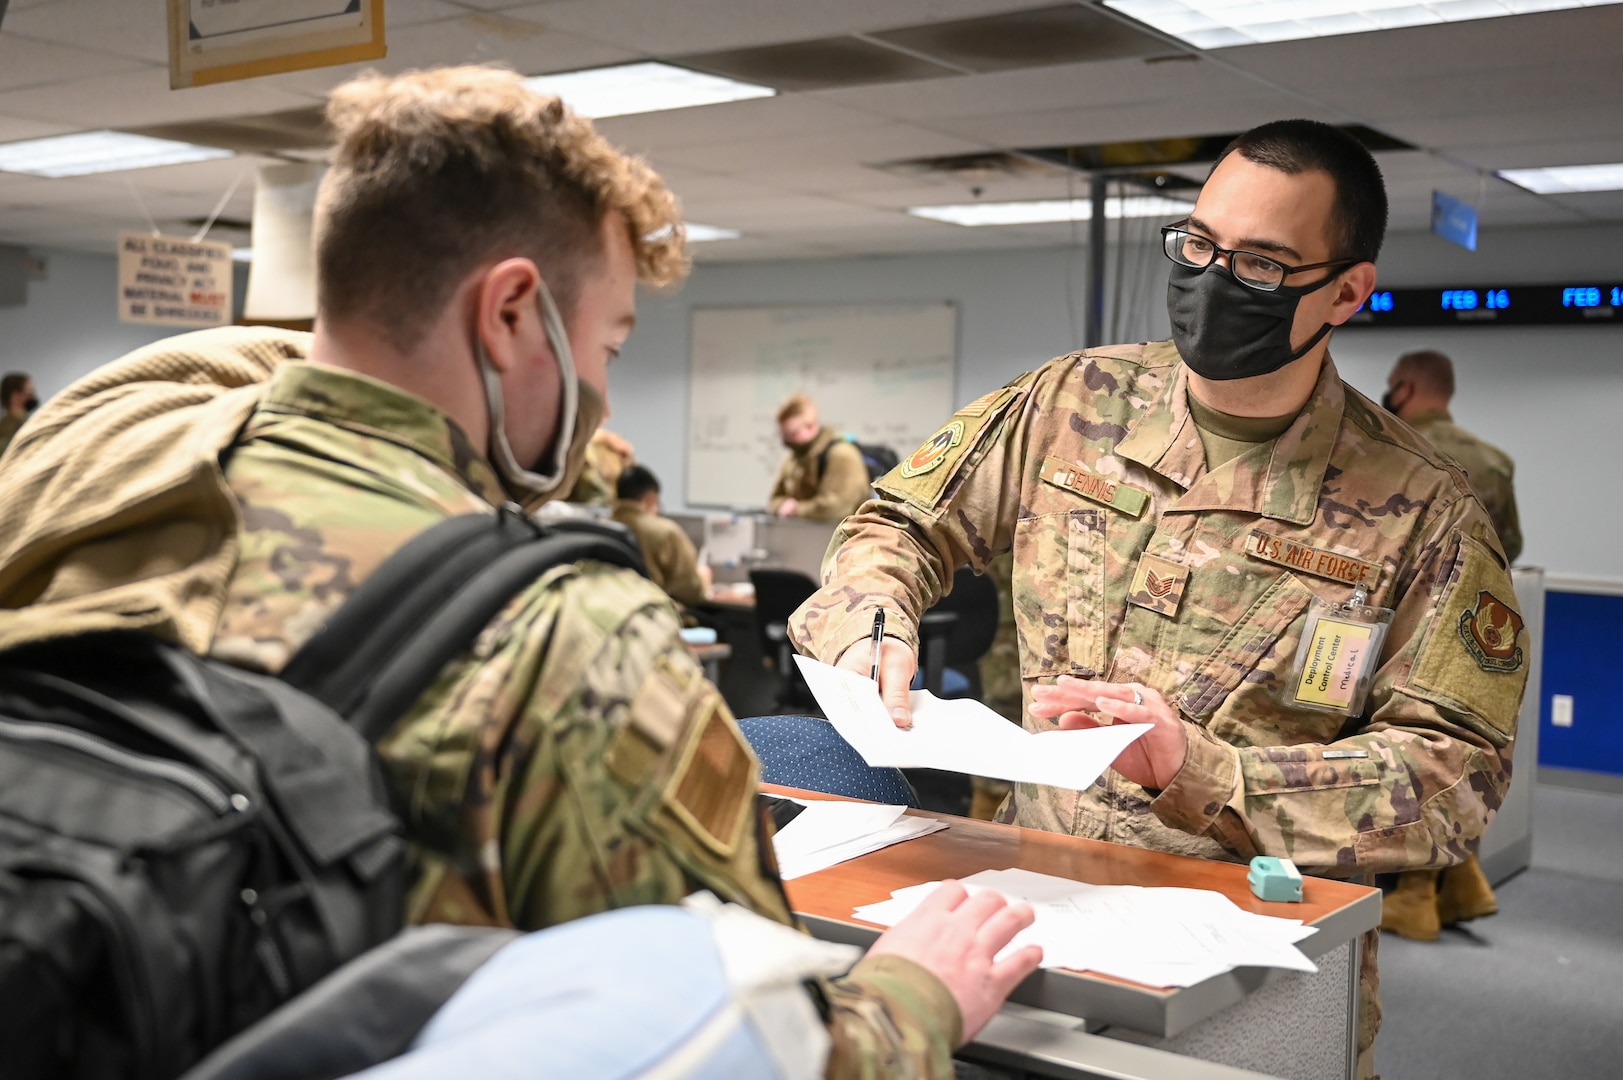 Tech. Sgt. Marc Dennis (right), 75th Medical Group, processes an Airman through a pre-deployment mobility line Feb. 16, 2022, at Hill Air Force Base, Utah. Airmen from the active duty 388th and Reserve 419th Fighter Wings were deployed with F-35A Lightning II aircraft to Spangdahlem Air Base, Germany, to bolster readiness and enhance NATO’s collective defensive posture. (U.S. Air Force photo by Cynthia Griggs)